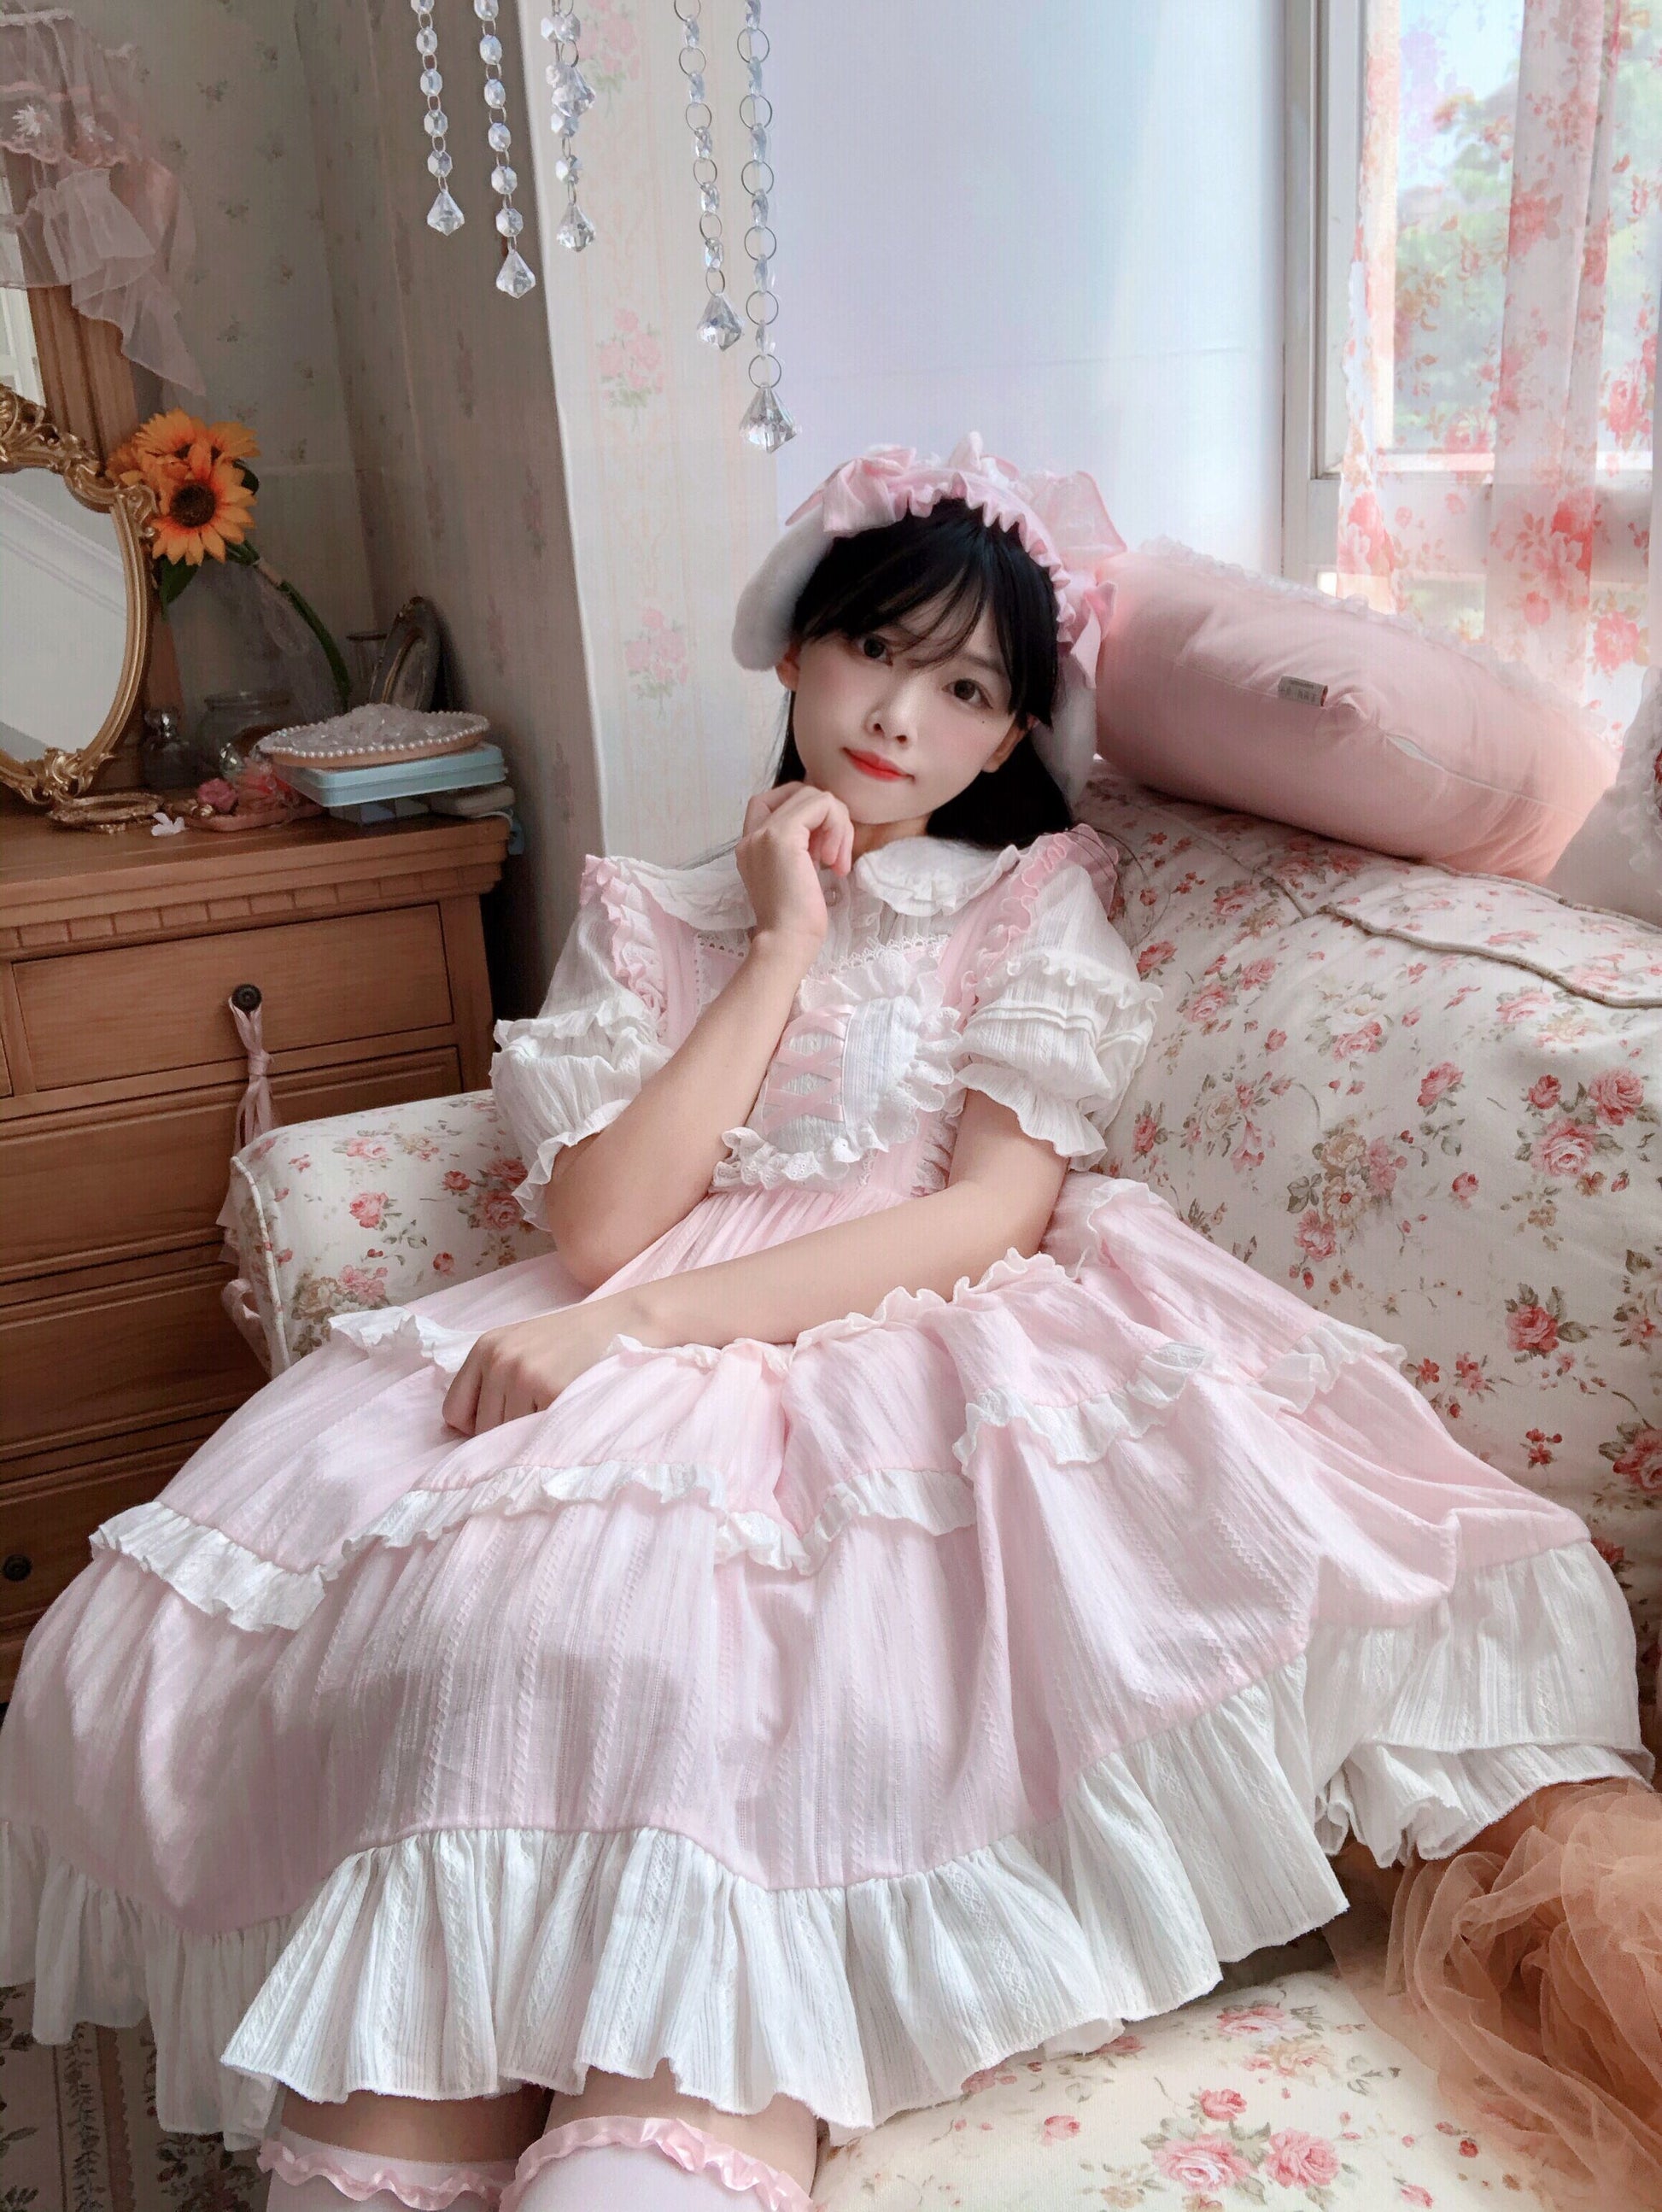 Summer Tea Party Princess Lolita - Kawaii Stop - All Dresses, Cosplay, Costumes, Dress, Girl, Japanese, Jsk Dress, Kawaii, Lolita, Lolita Dresses, Princess, Sling, Soft, Solid Color, Summer, Sweet, Tea Party, Women's Clothing &amp; Accessories